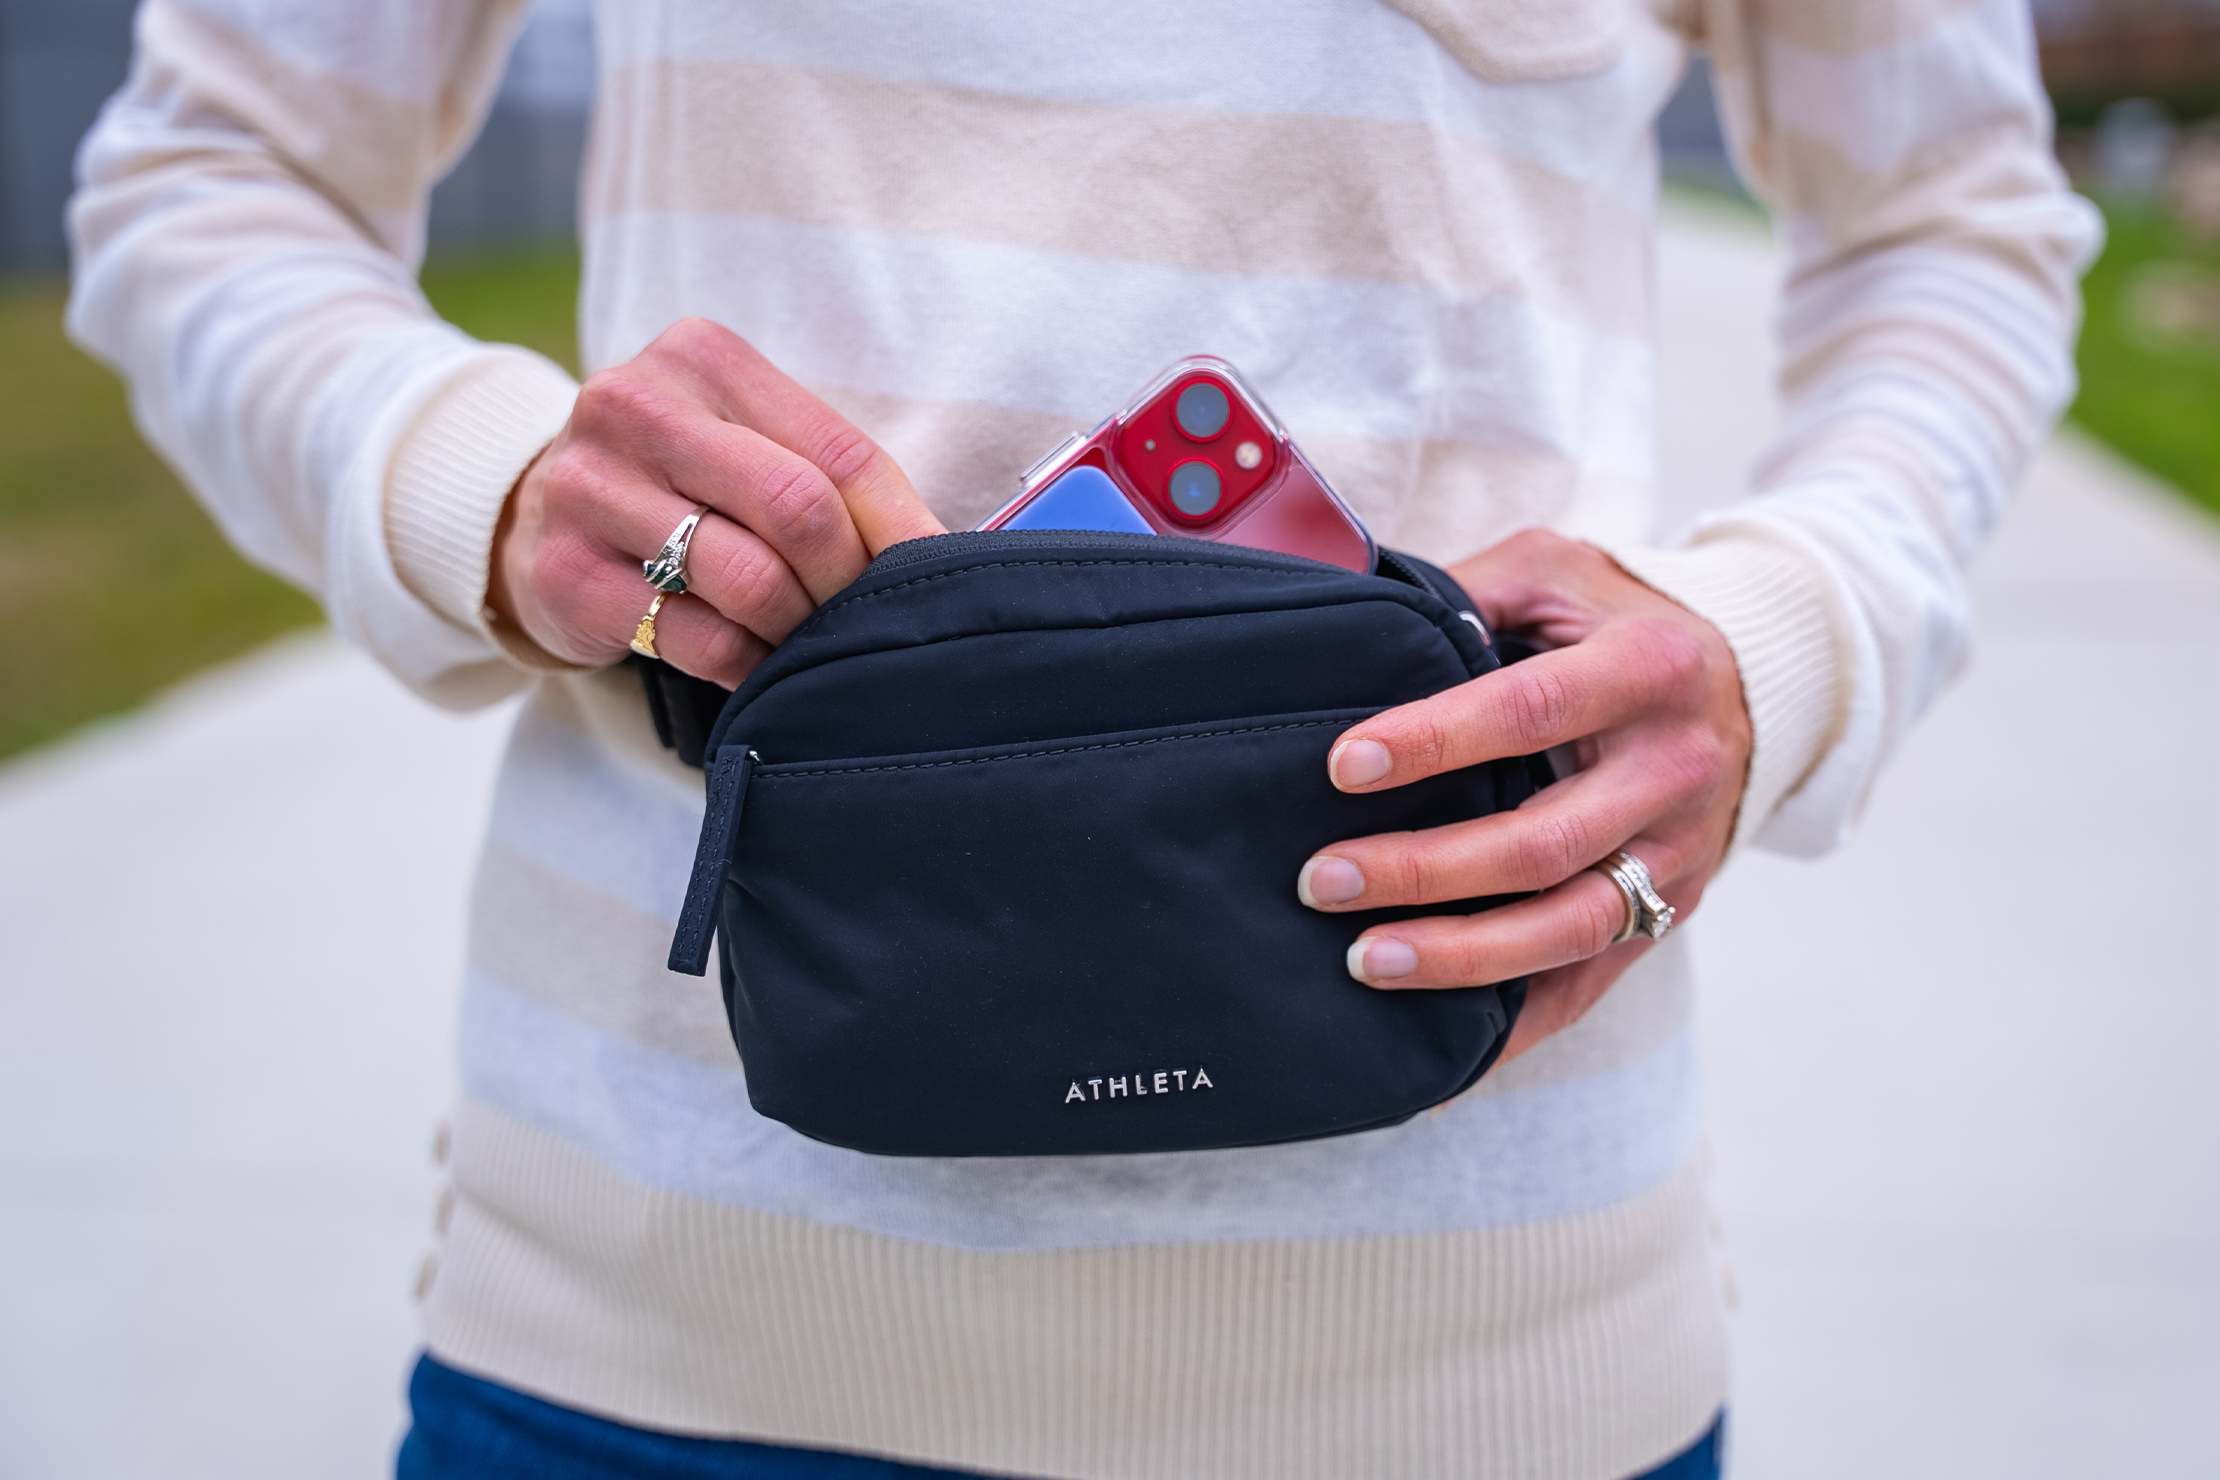 Athleta All About Belt Bag in Use